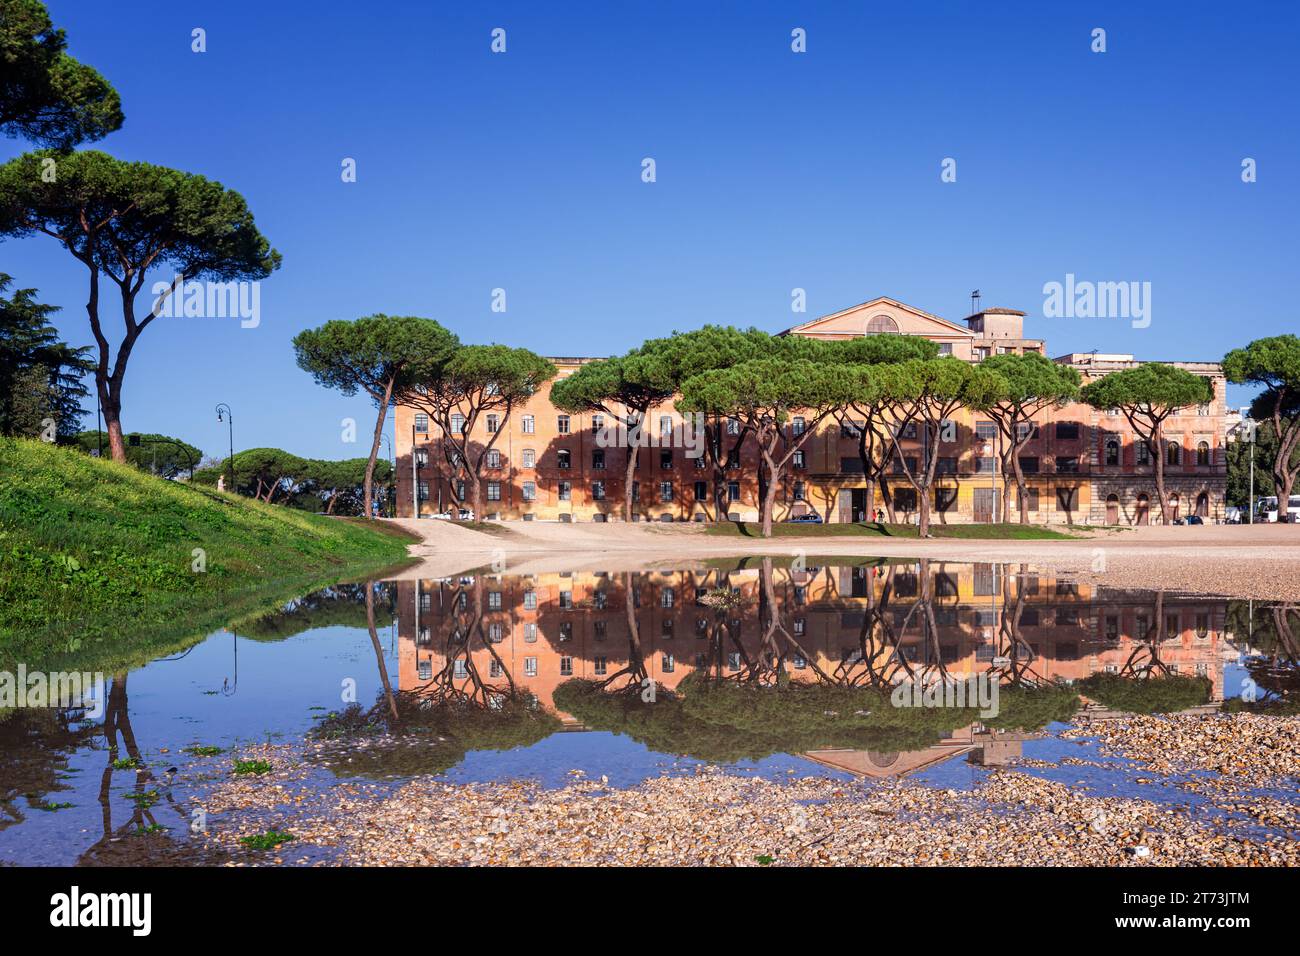 Reflection of a building in a water pool at Circus Maximus, Rome, Lazio, Italy Stock Photo